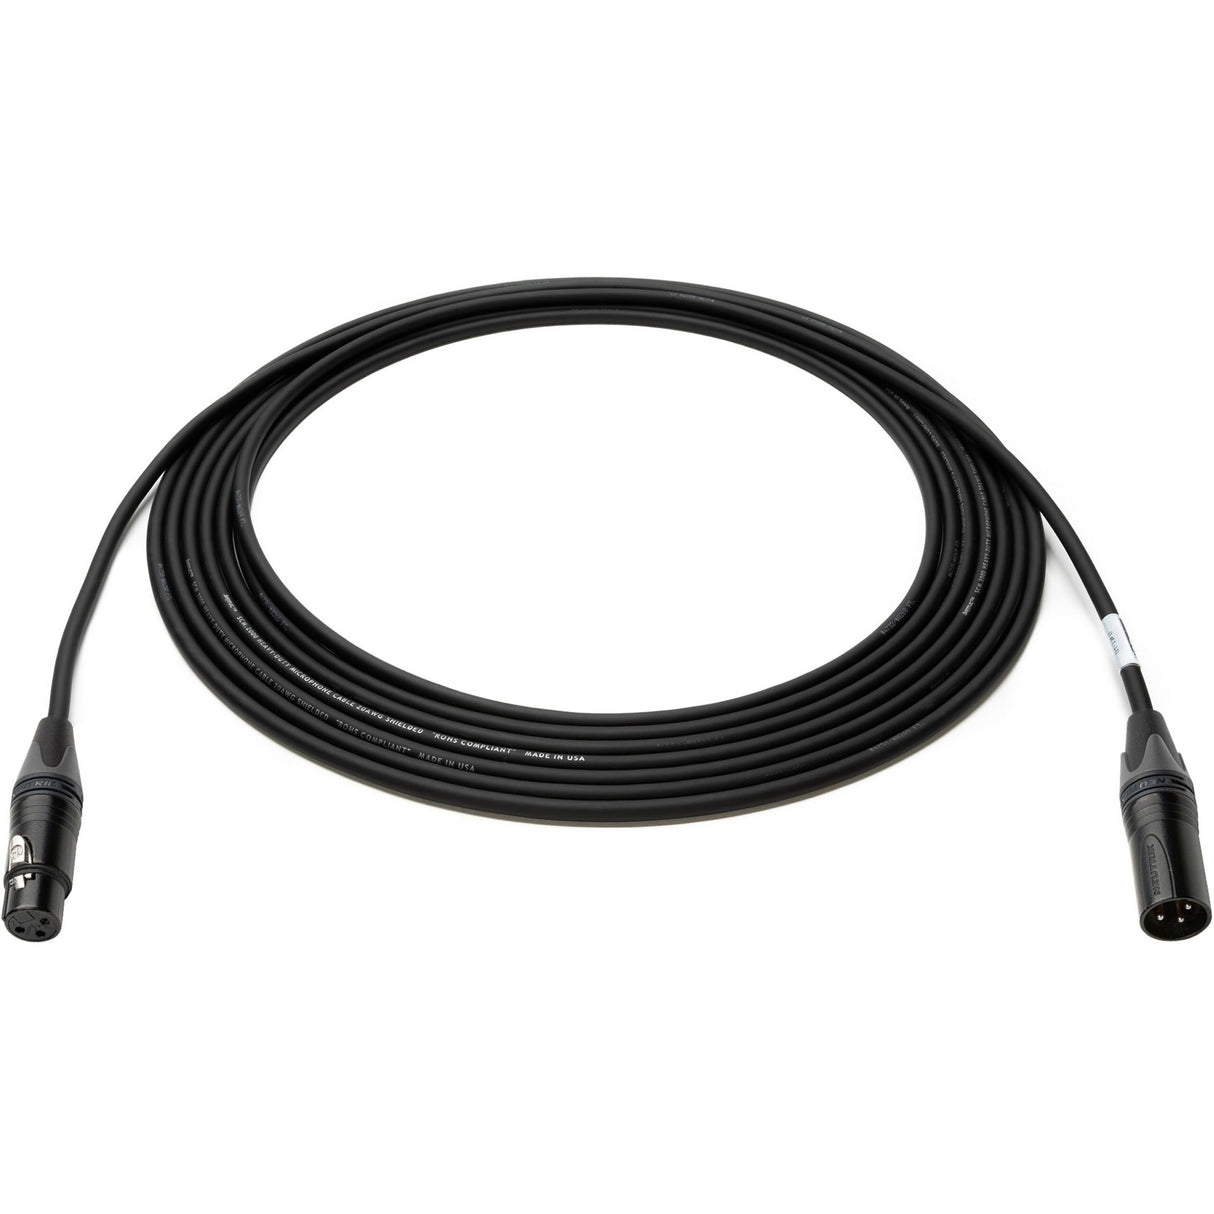 Sescom SCTX-XXJ-025 Touring Grade Microphone Cable with Neutrik Black and Silver 3-Pin XLR Connectors, 25-Foot